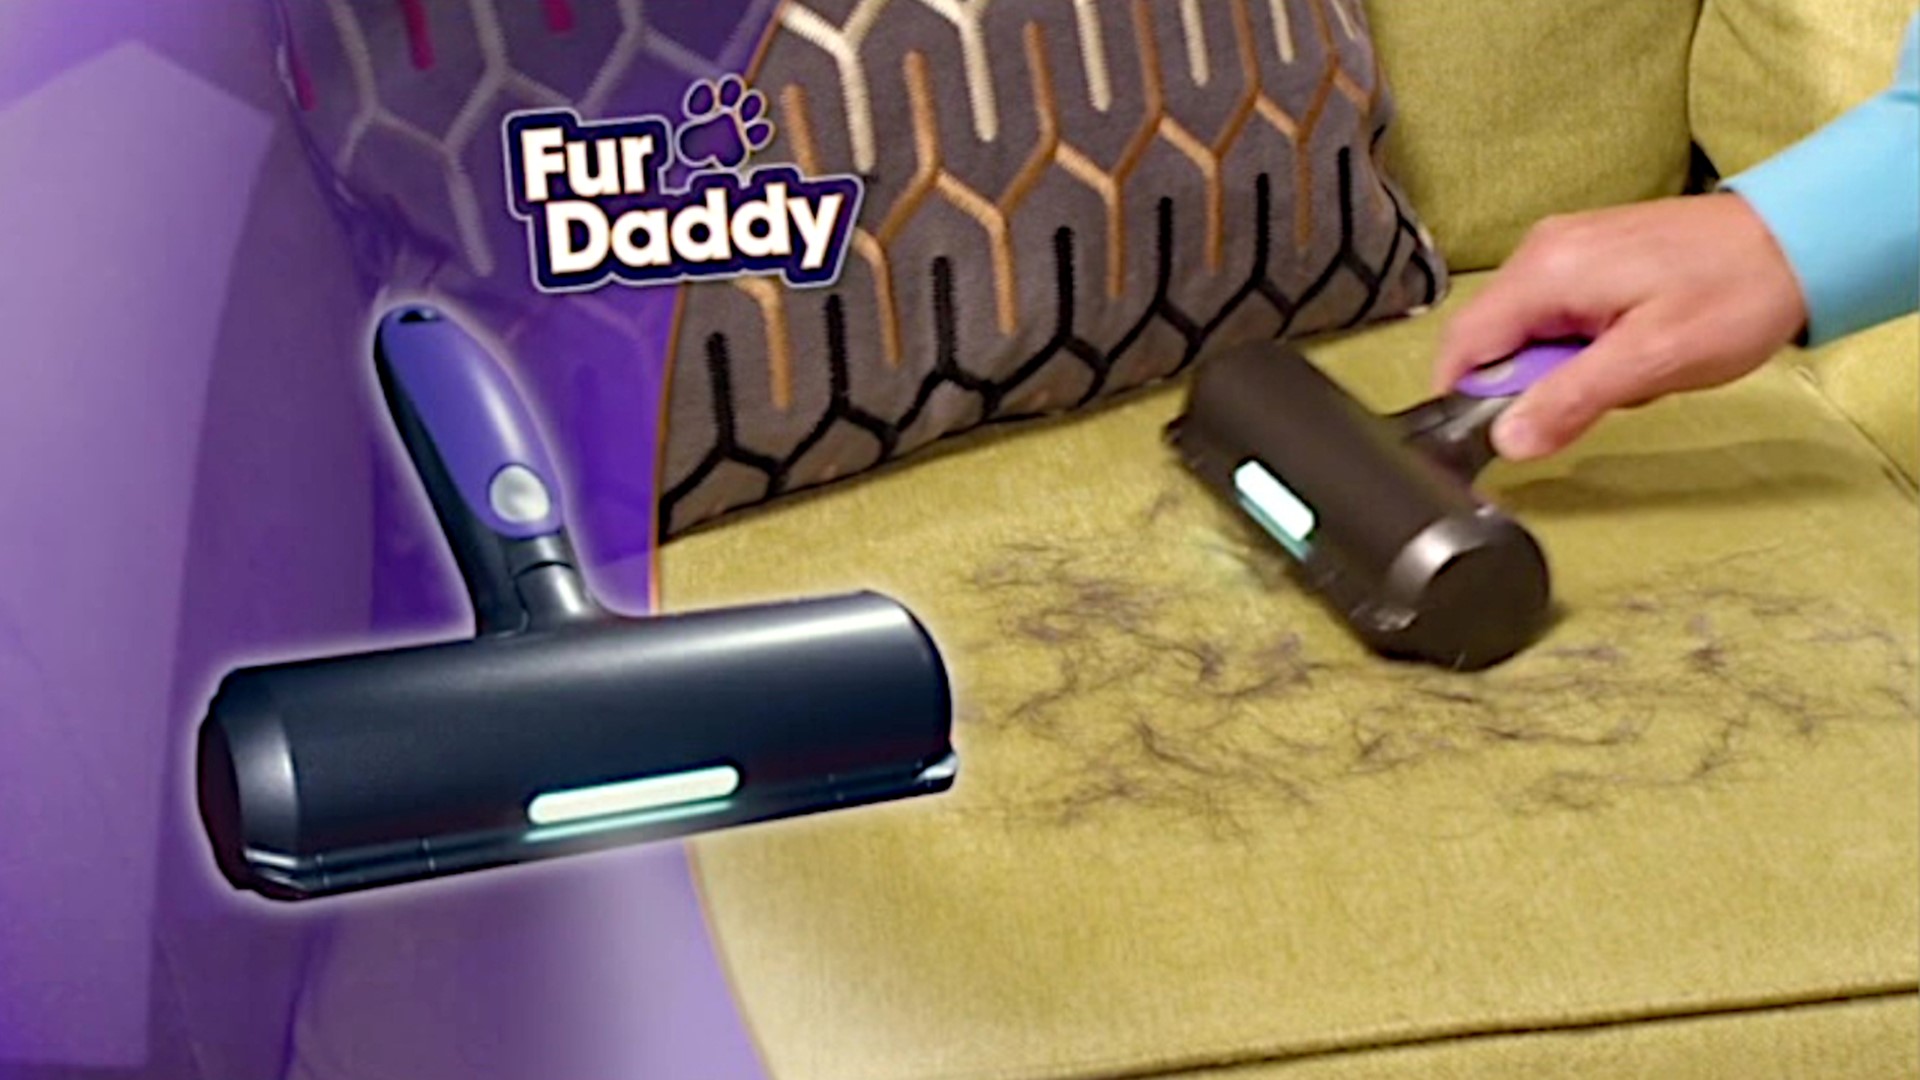 The new pet hair remover has sonic technology that supposedly picks up and removes unwanted pet fur.